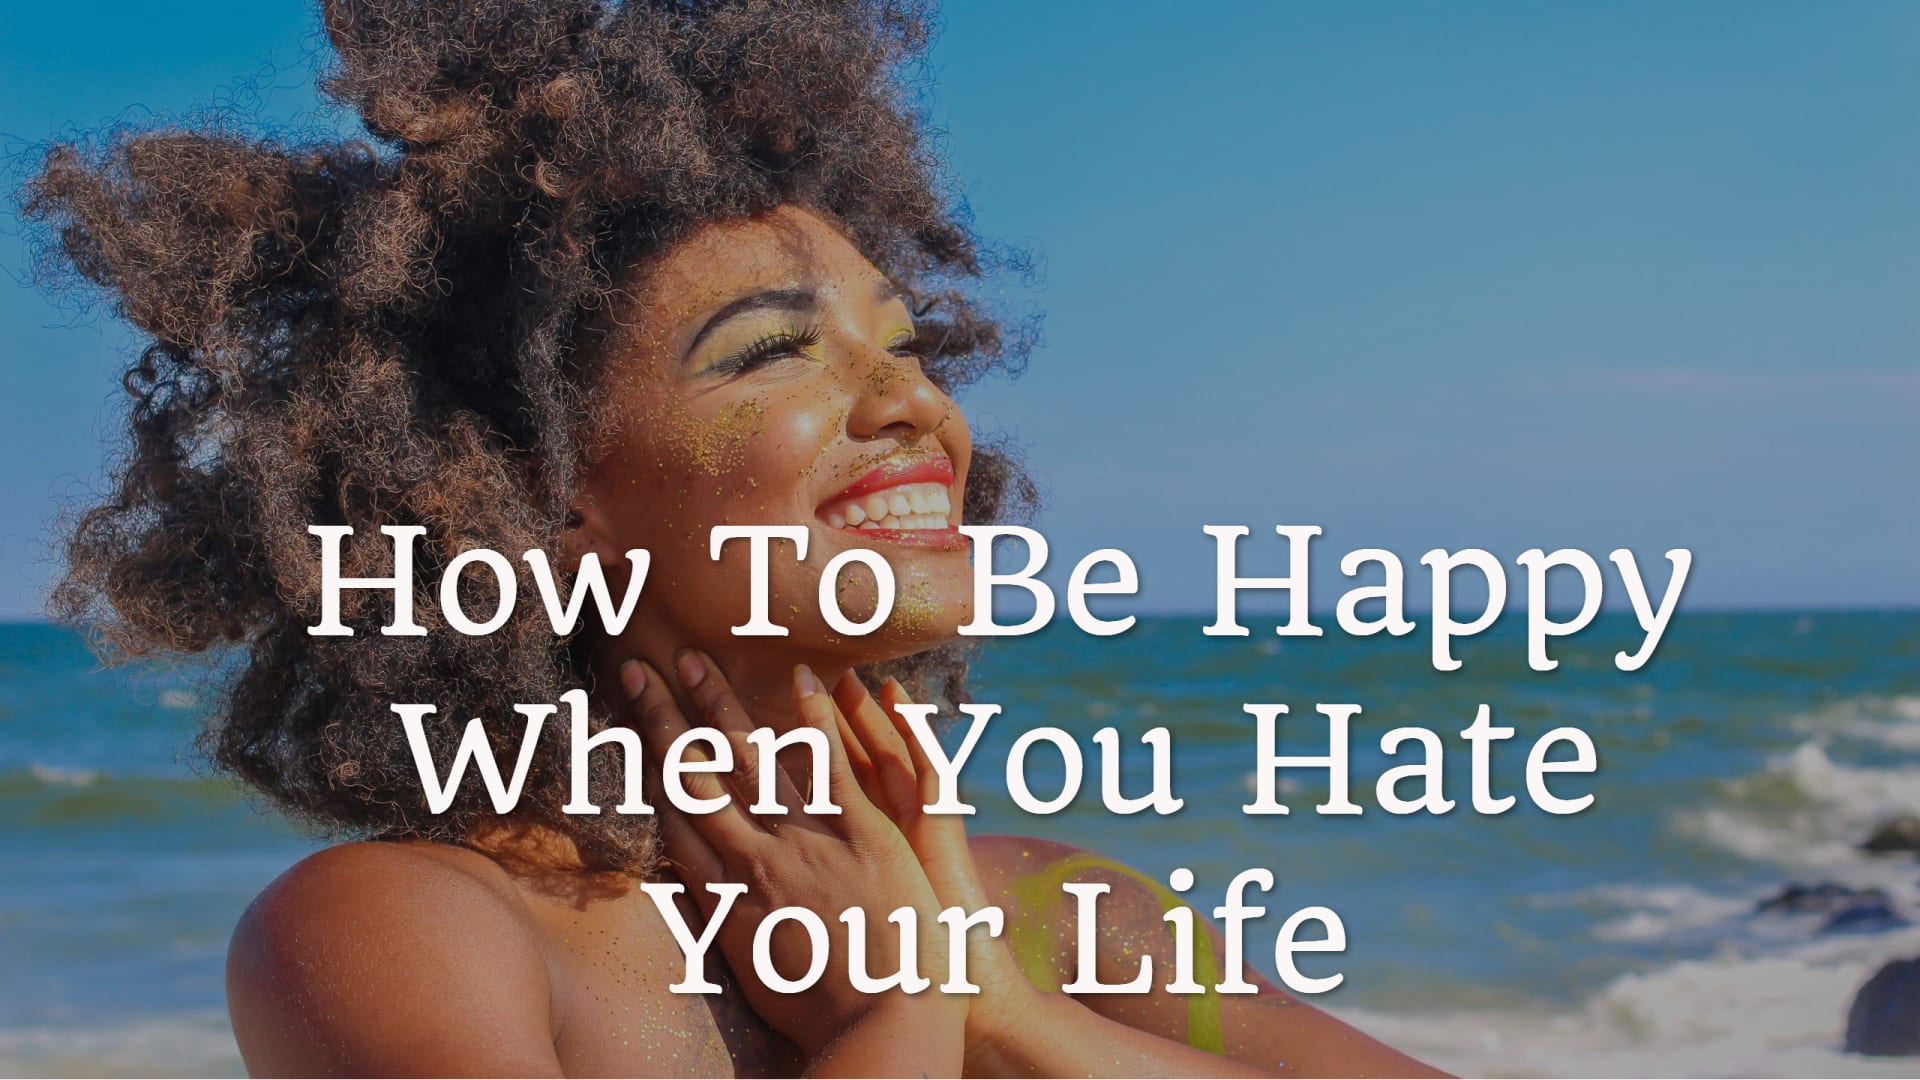 How To Be Happy When You Hate Your Life